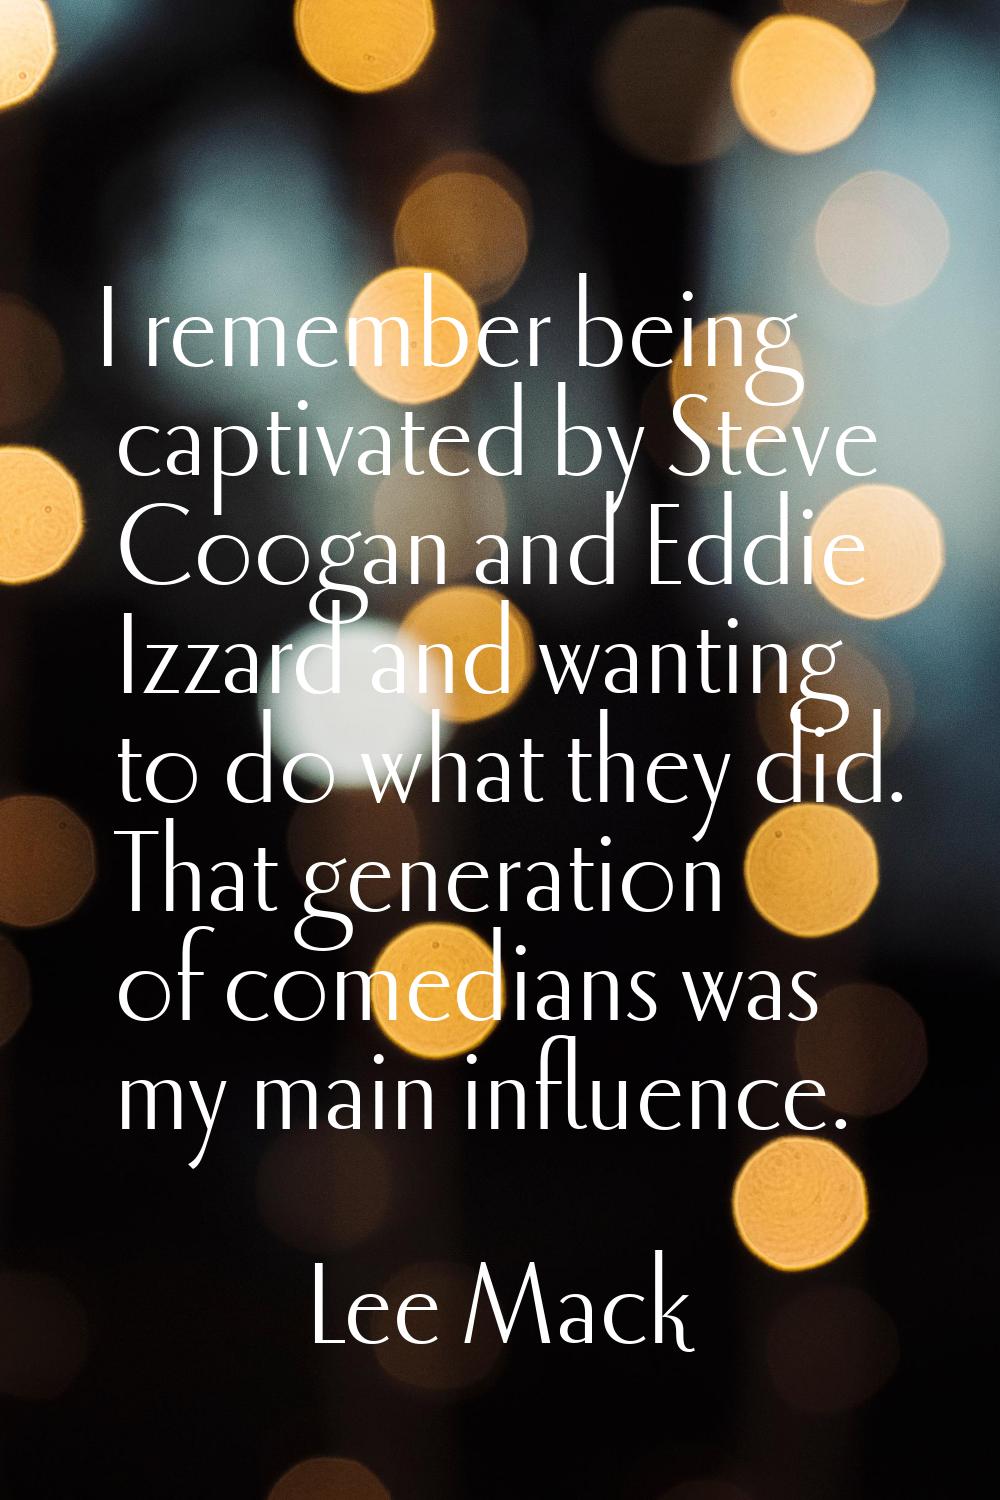 I remember being captivated by Steve Coogan and Eddie Izzard and wanting to do what they did. That 